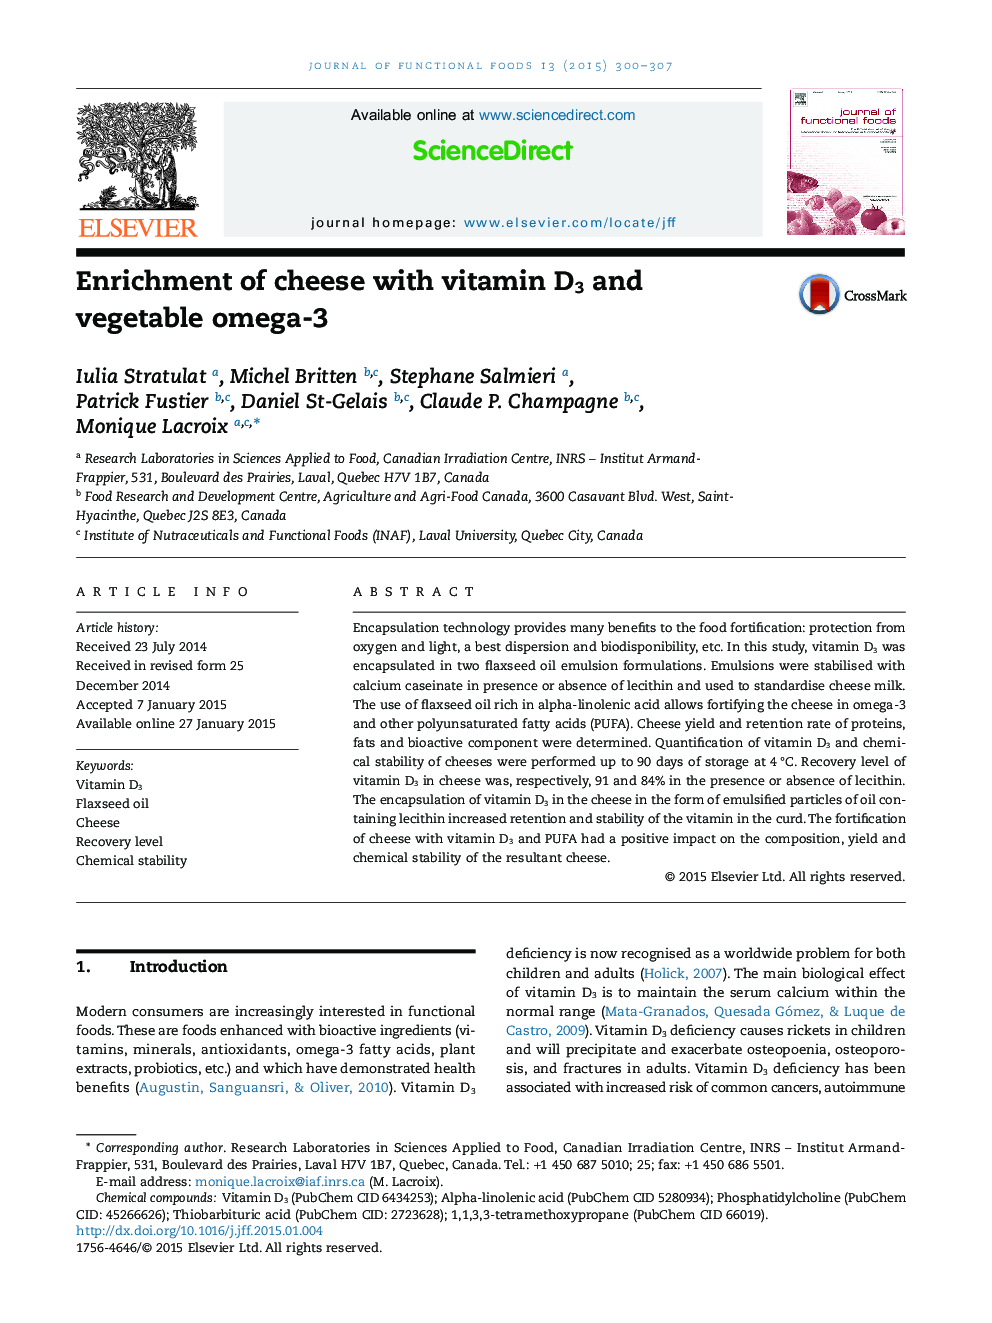 Enrichment of cheese with vitamin D3 and vegetable omega-3